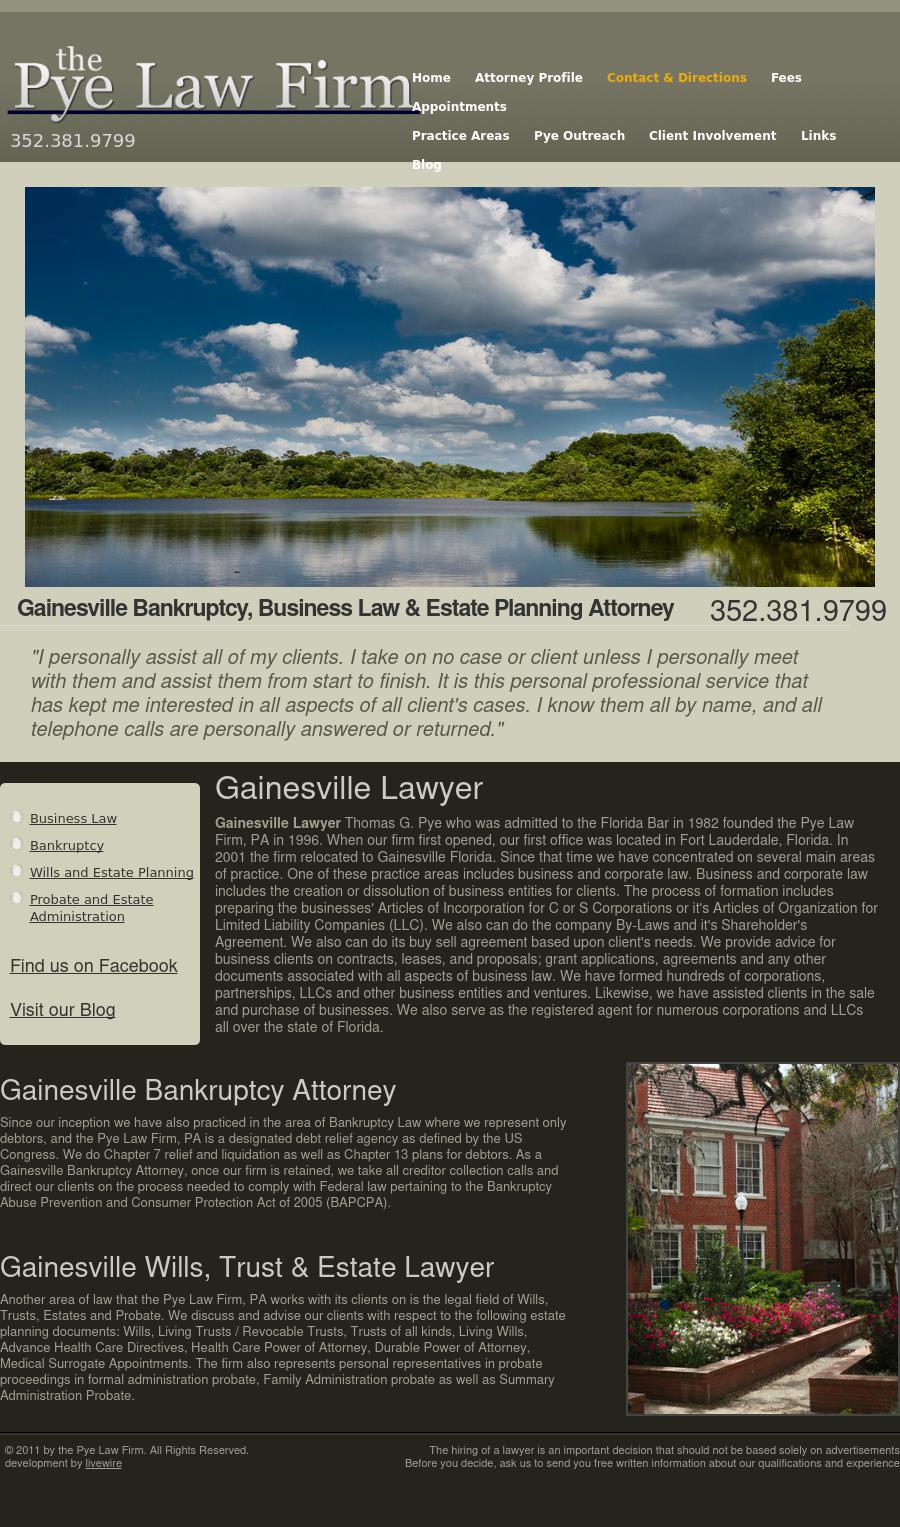 The Shigo Law Firm PA - Gainesville FL Lawyers